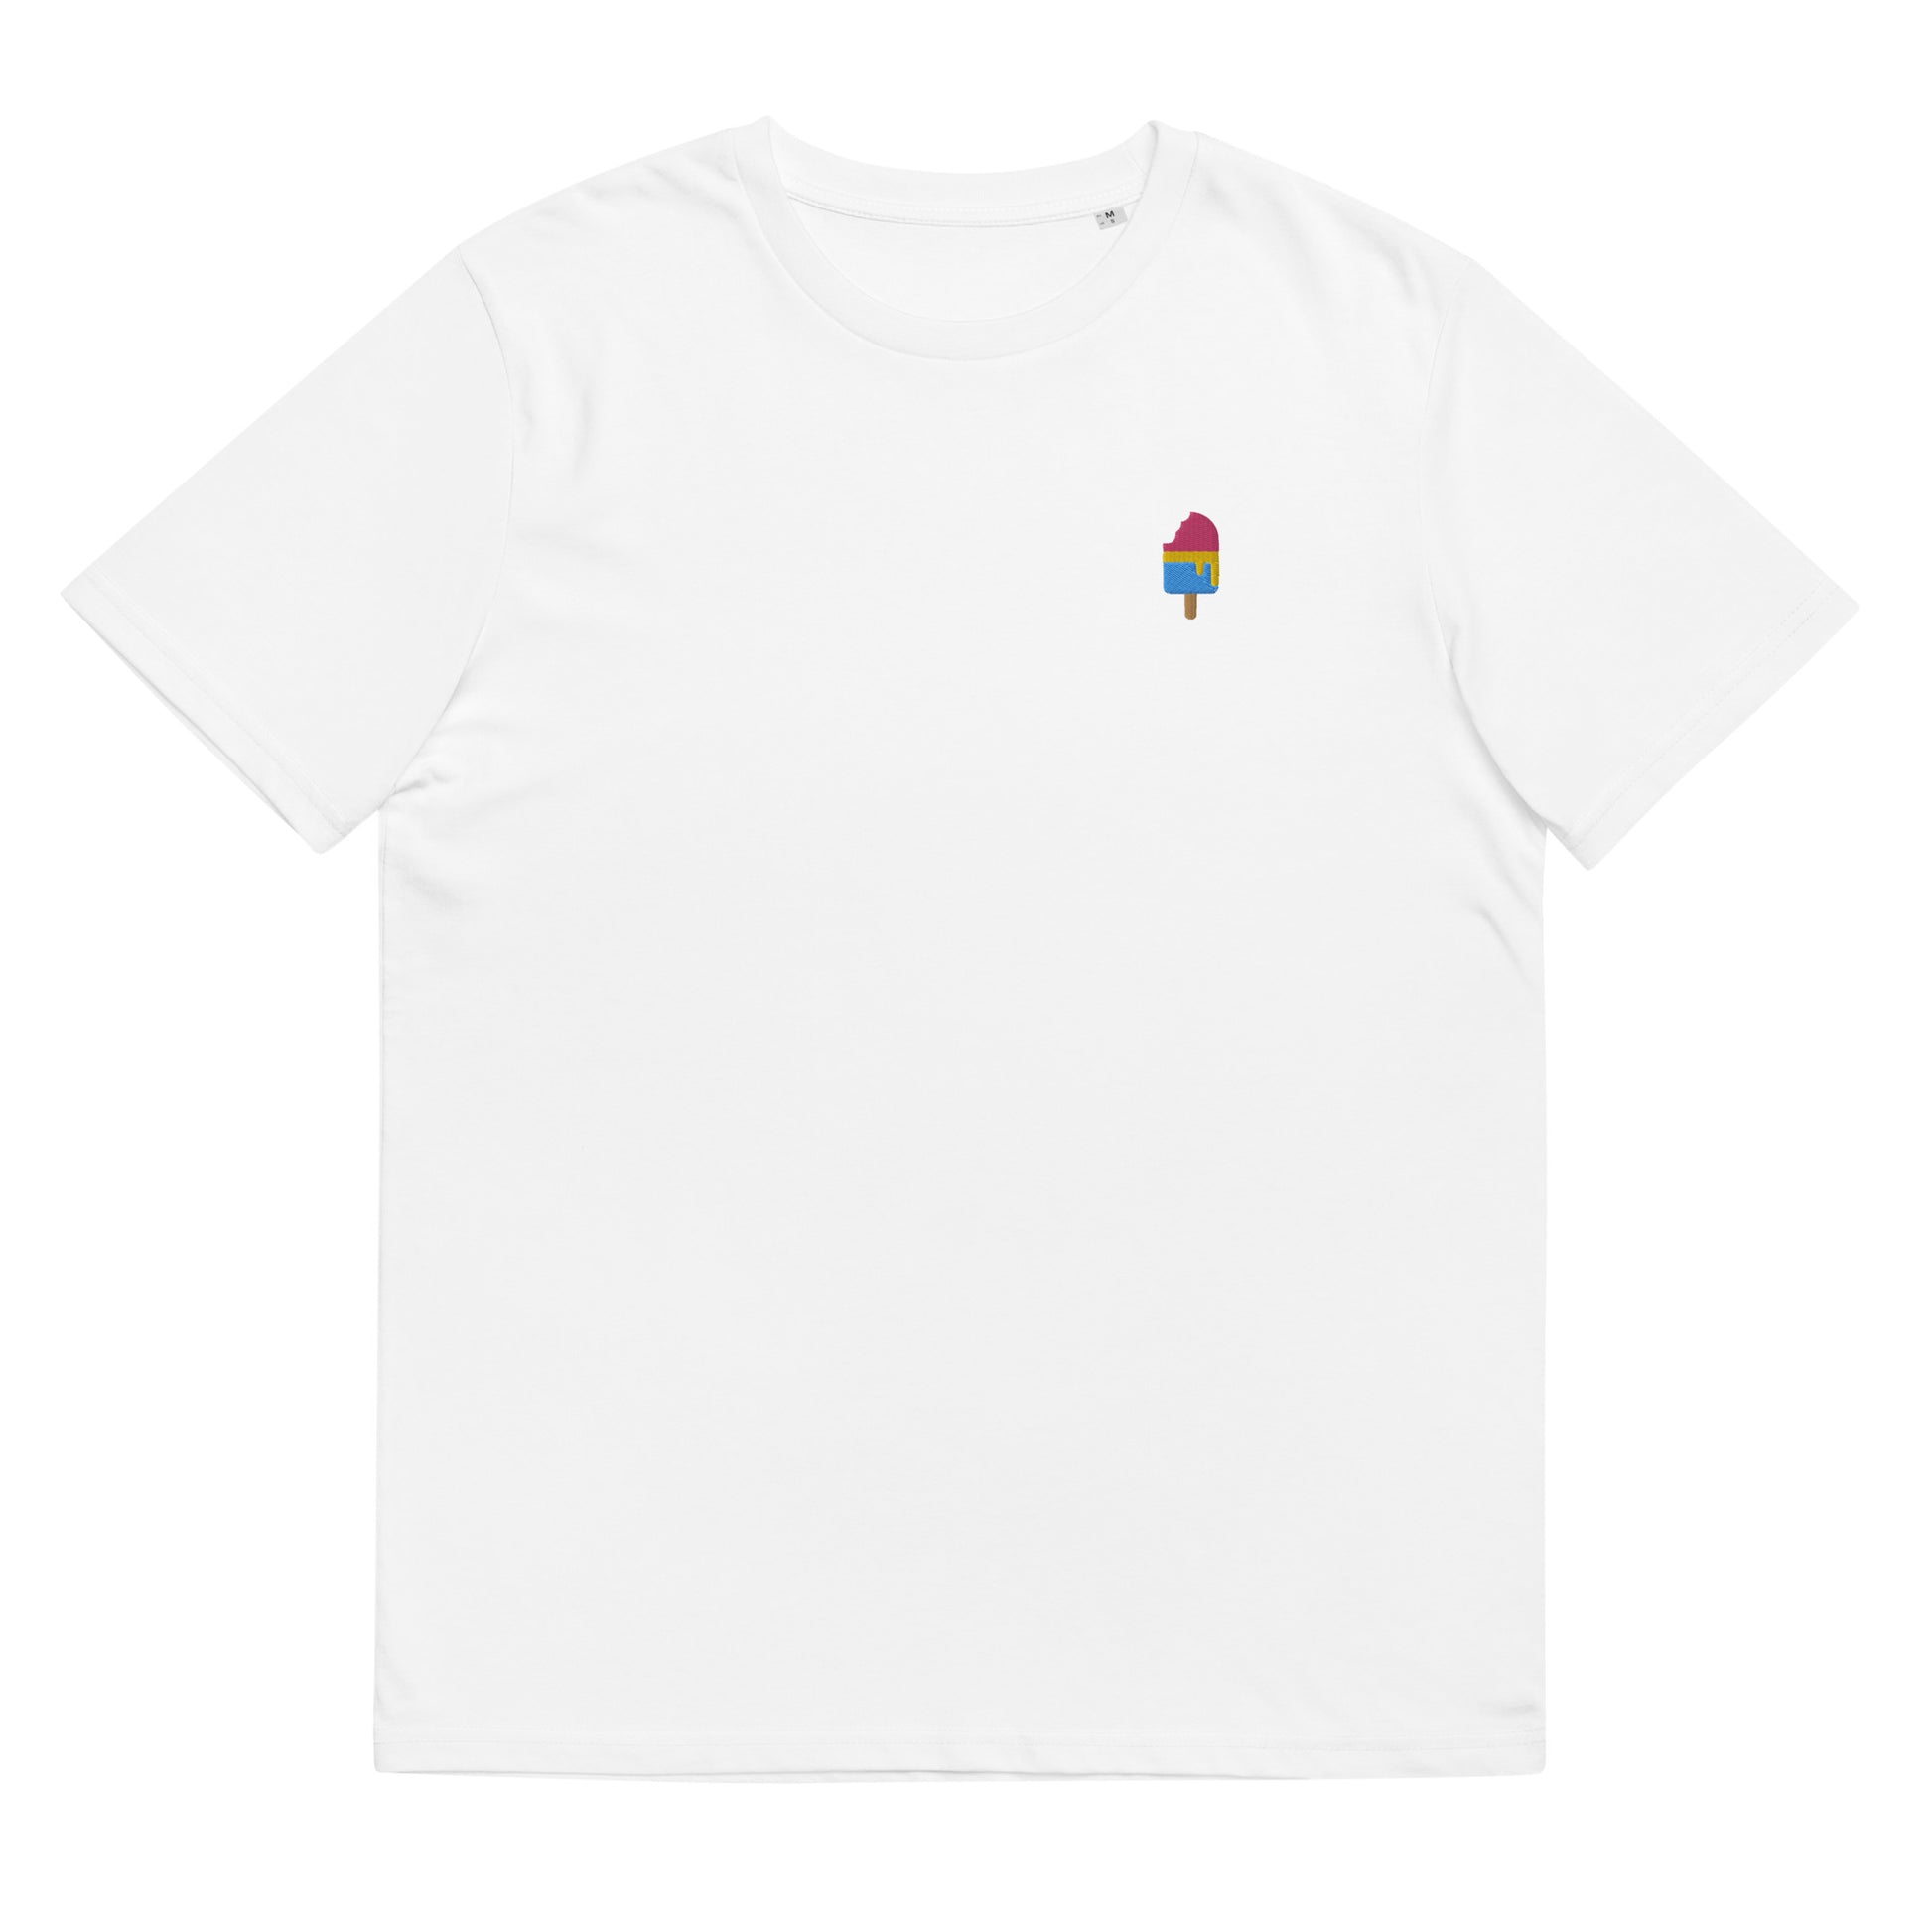 Fitted white organic cotton t-shirt with a small embroidered ice cream in pansexual colors on the left chest. Available in sizes S to 3XL.